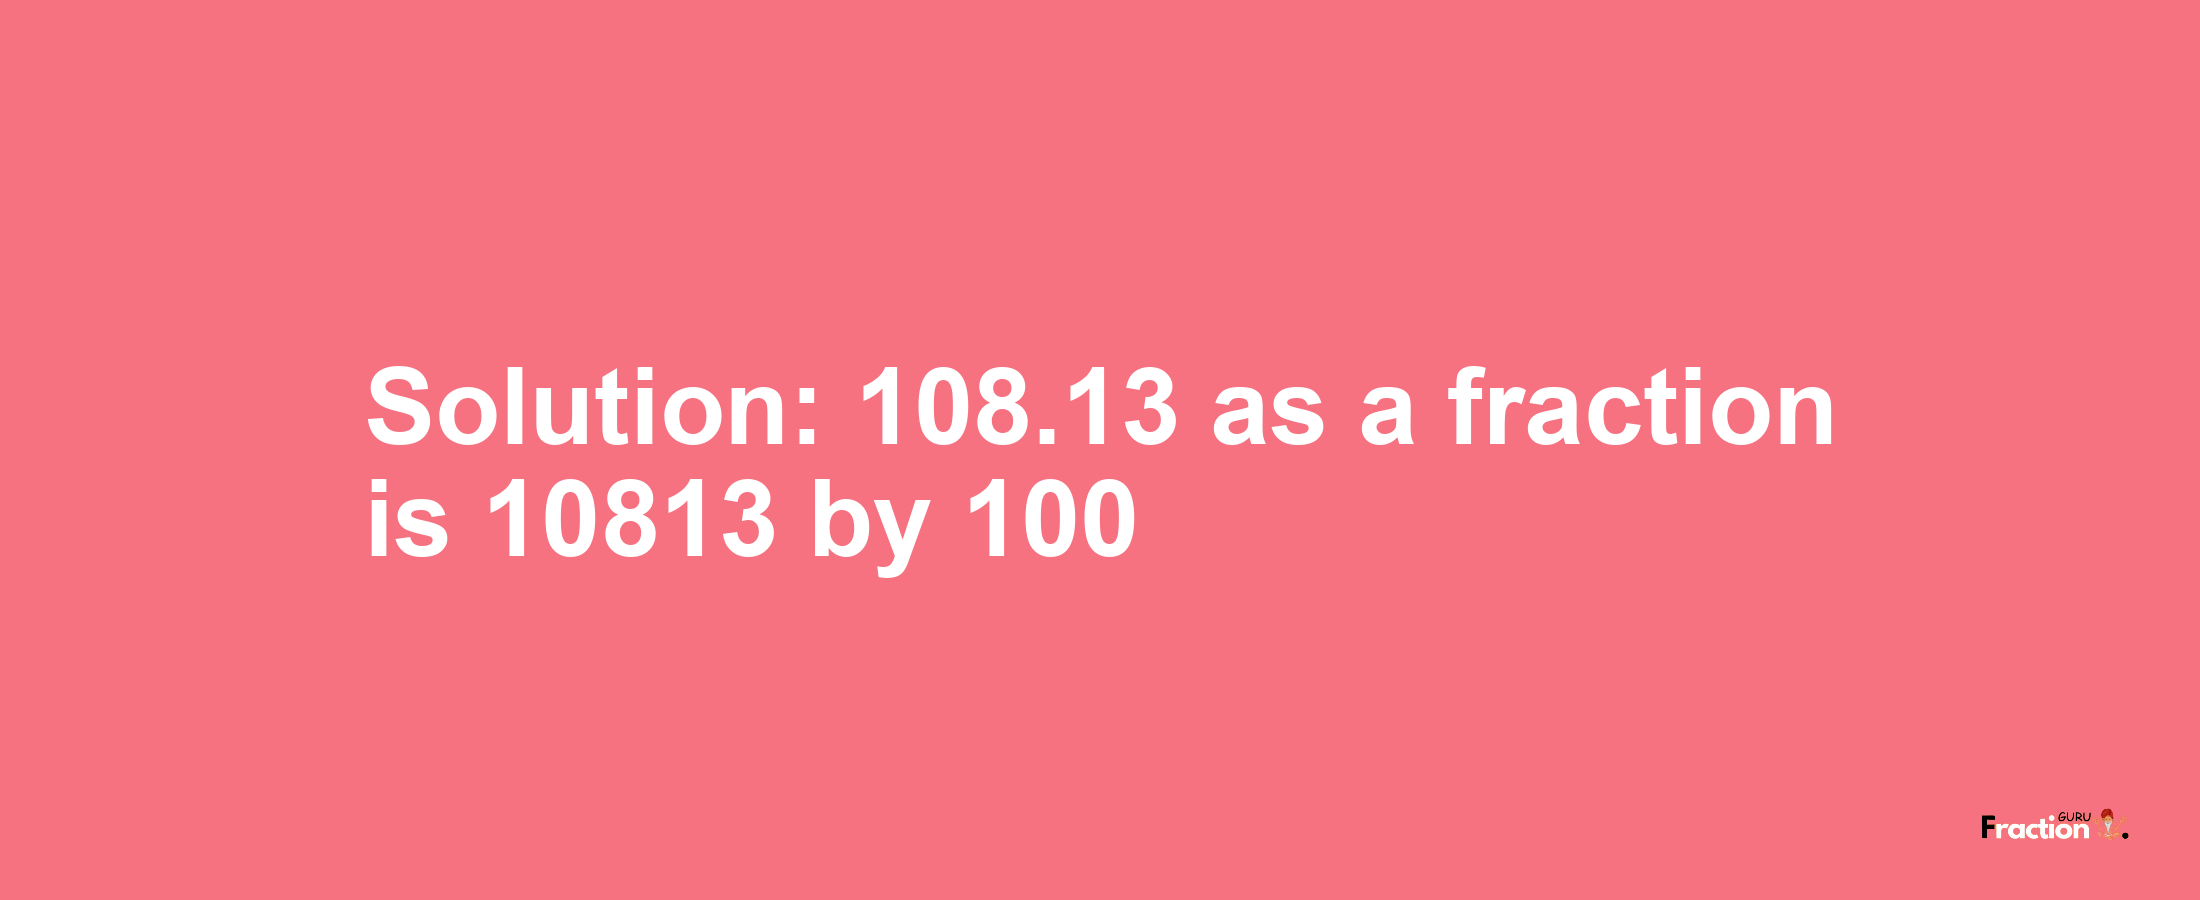 Solution:108.13 as a fraction is 10813/100